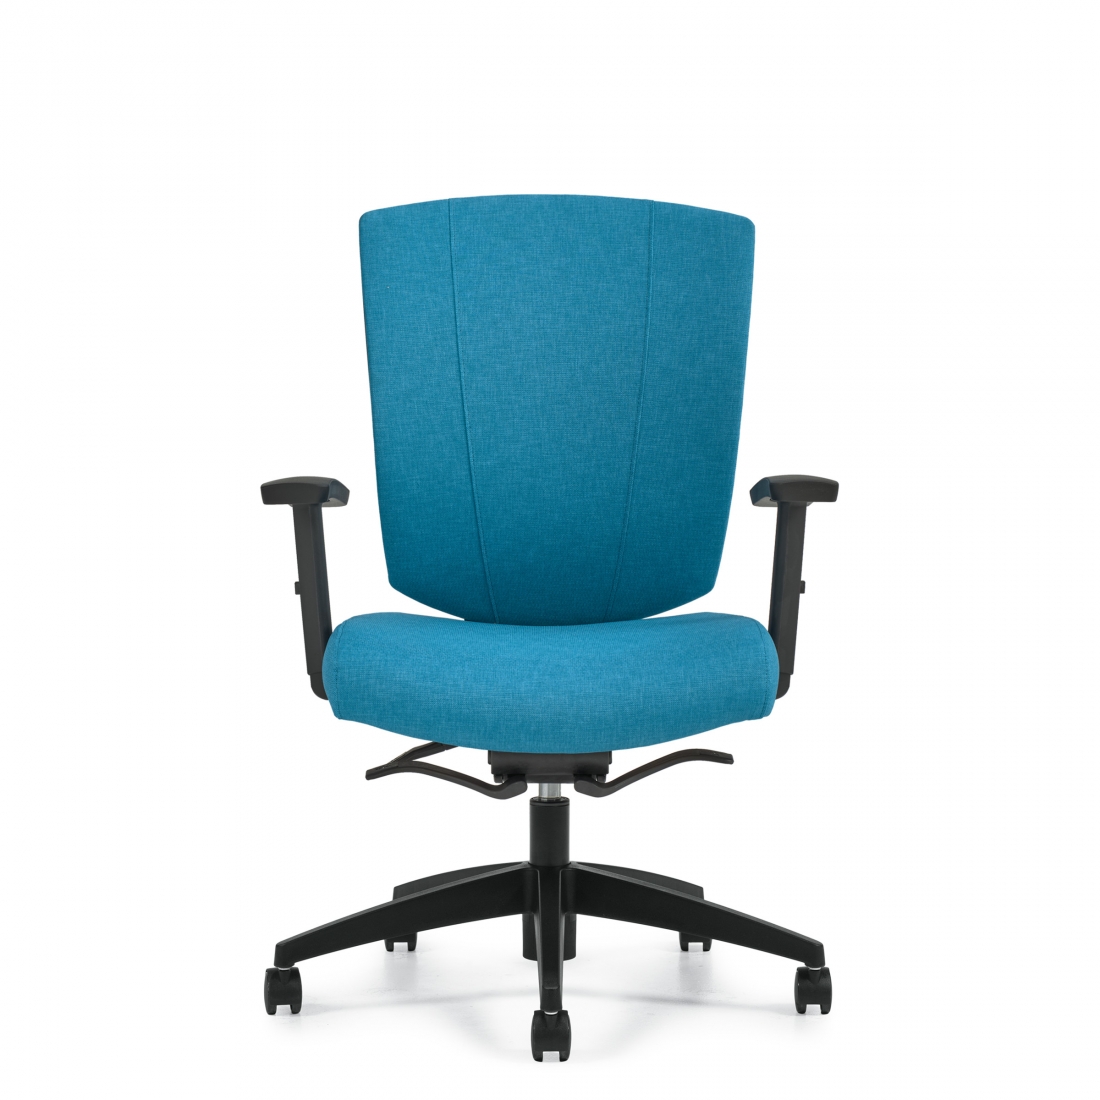 Avro | Upholstered Seat & Back Weight Sensing Synchro Chair